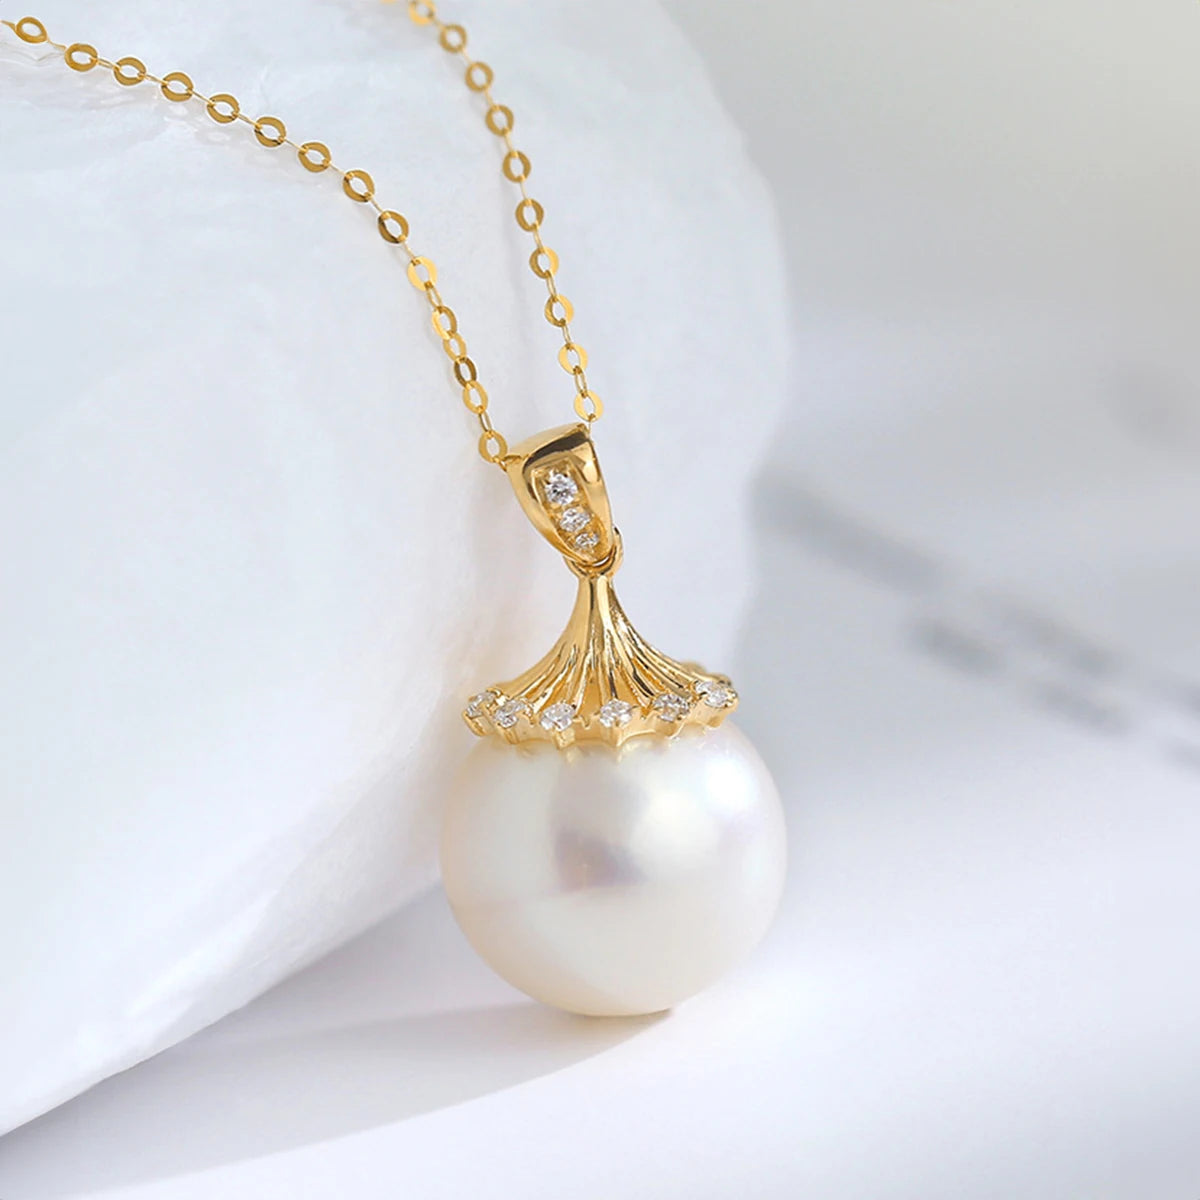 Pearl necklace 100% natural 18K gold timeless luxury